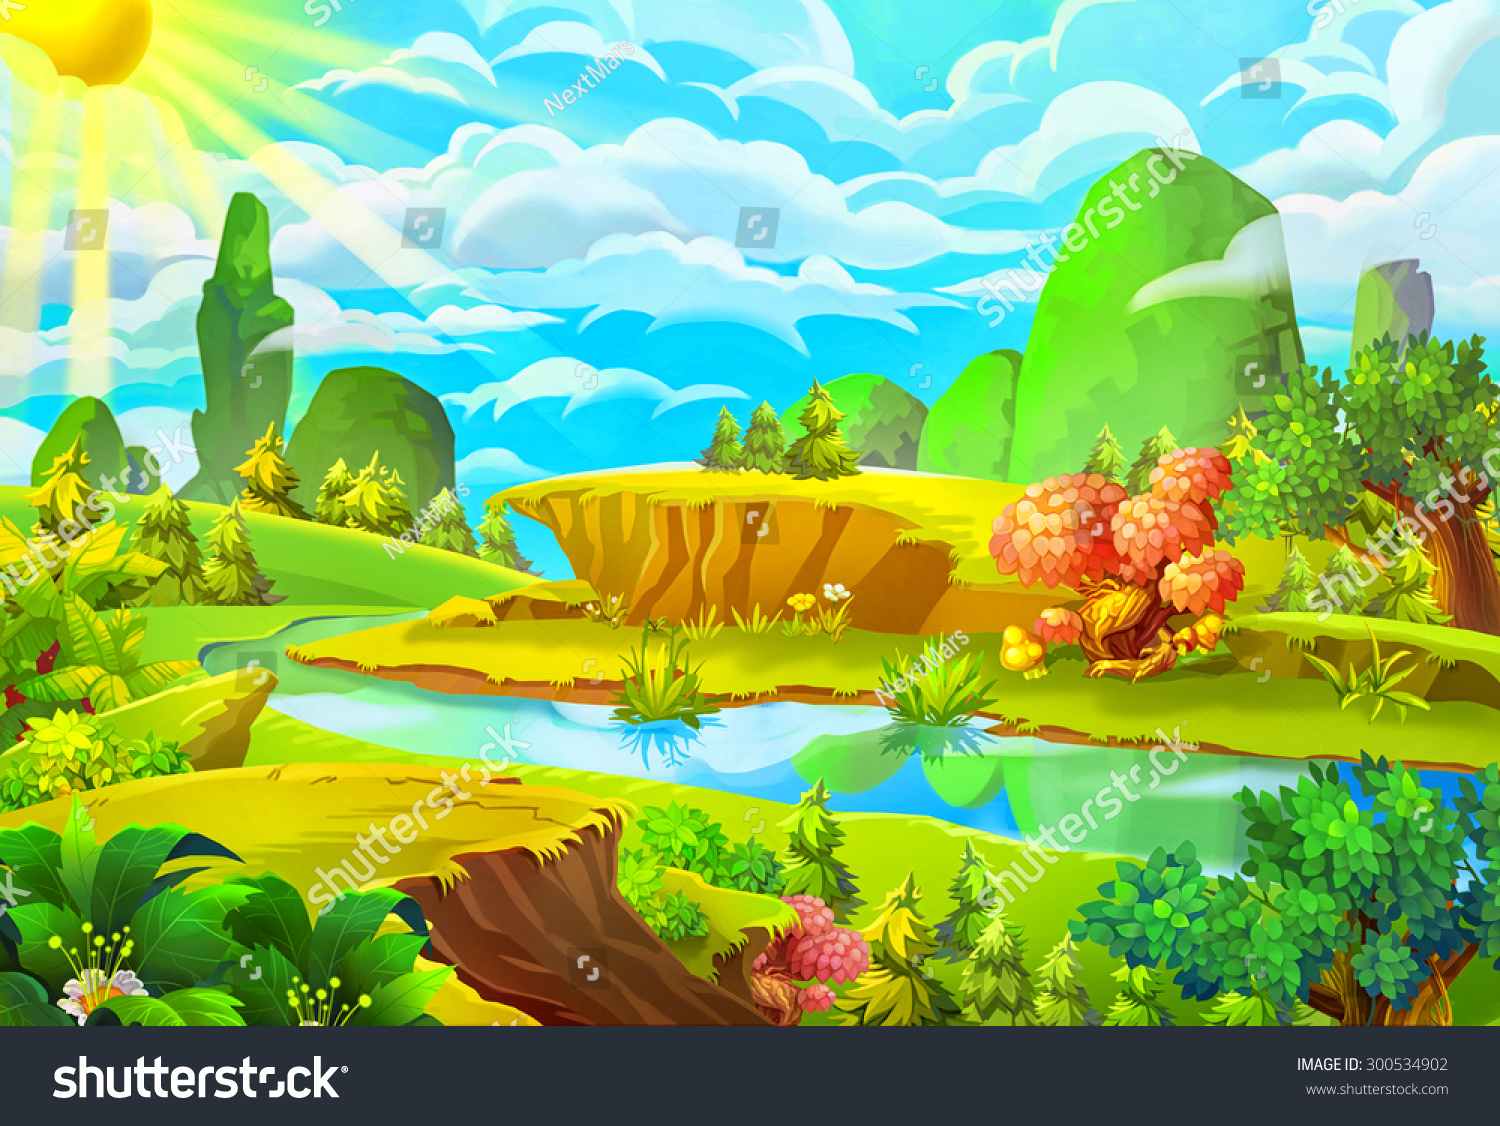 nature animated clipart - photo #50